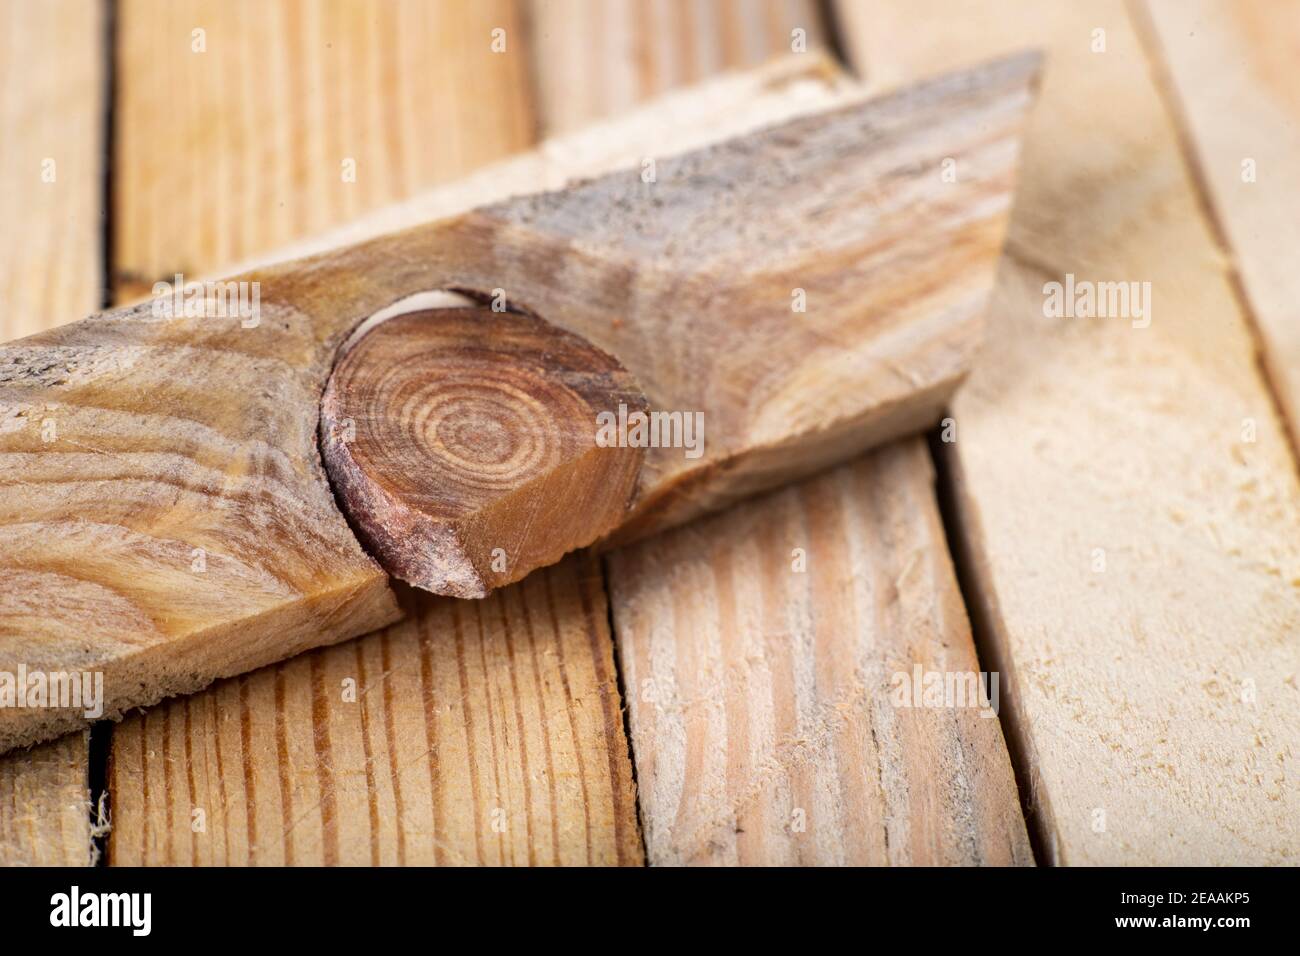 A hard knot in a raw slat. A knot from a piece of wood. Light background. Stock Photo